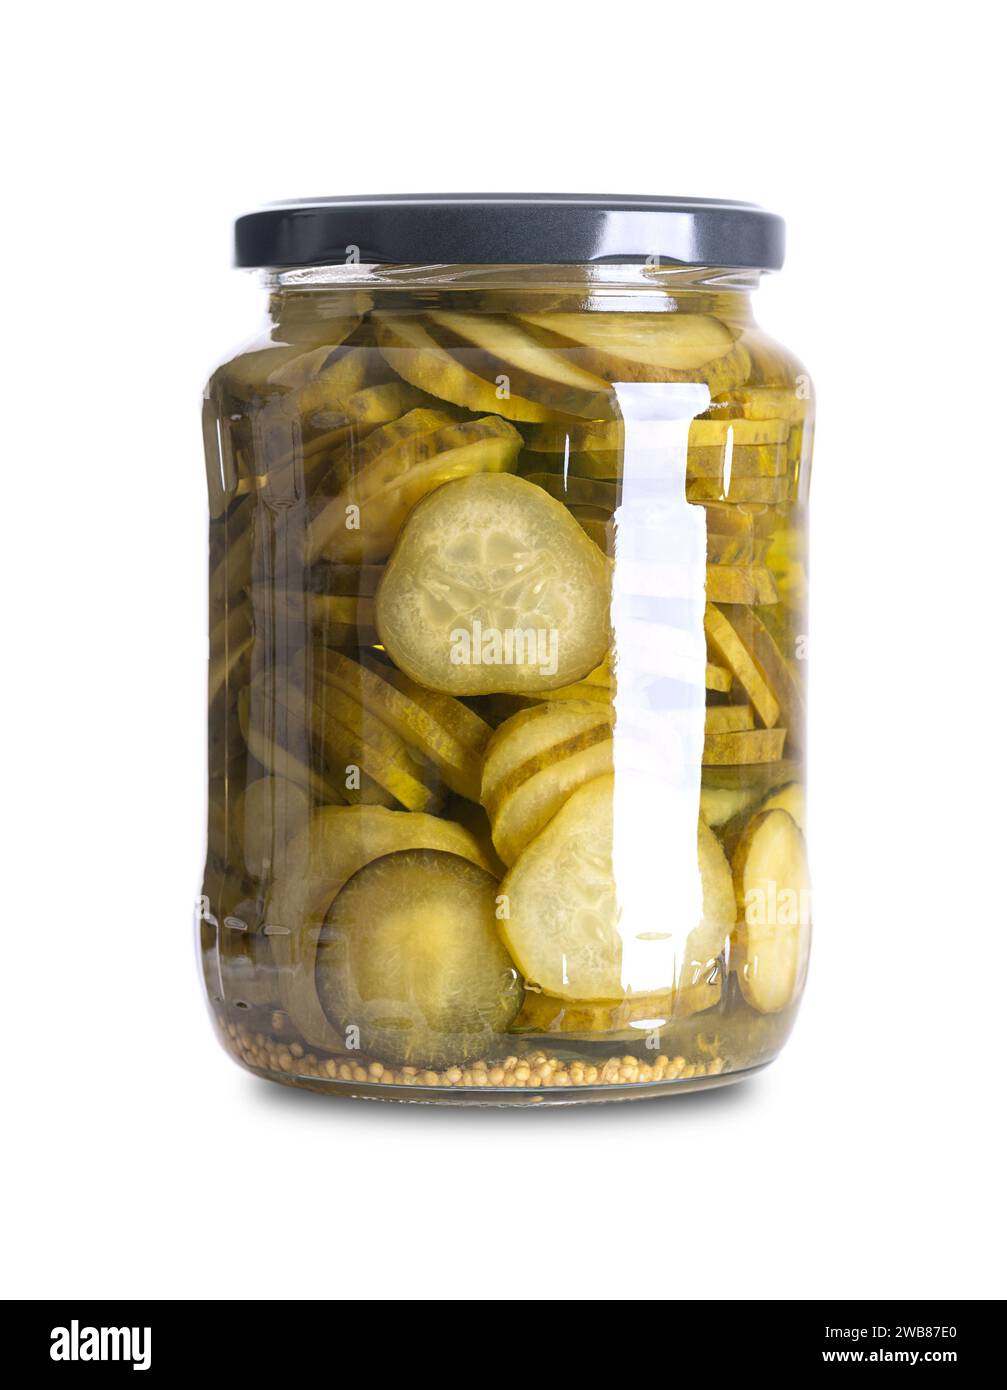 Burger gherkins, pickled cucumber slices, in a glass jar. Crisp round cucumber slices, pasteurized and preserved in a brine. Stock Photo